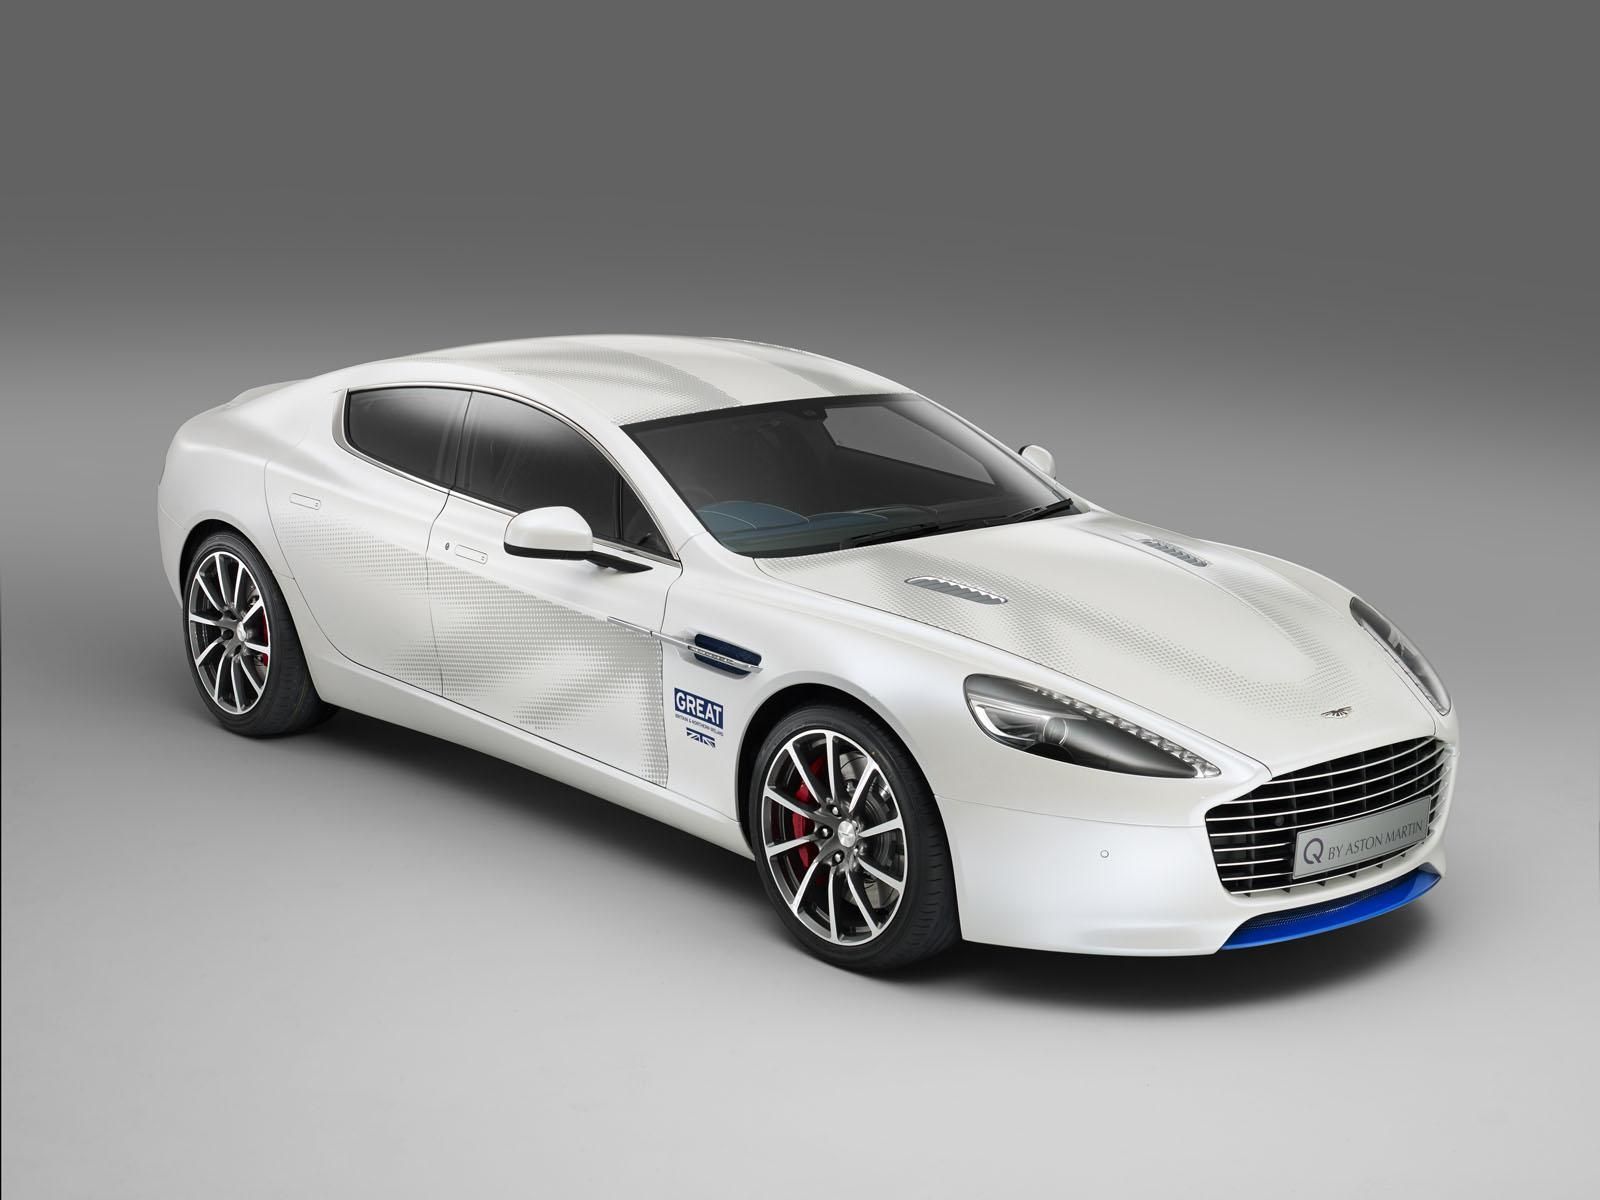 Aston Martin Unveiled one-off Rapide S to Promote GREAT Britain campaign